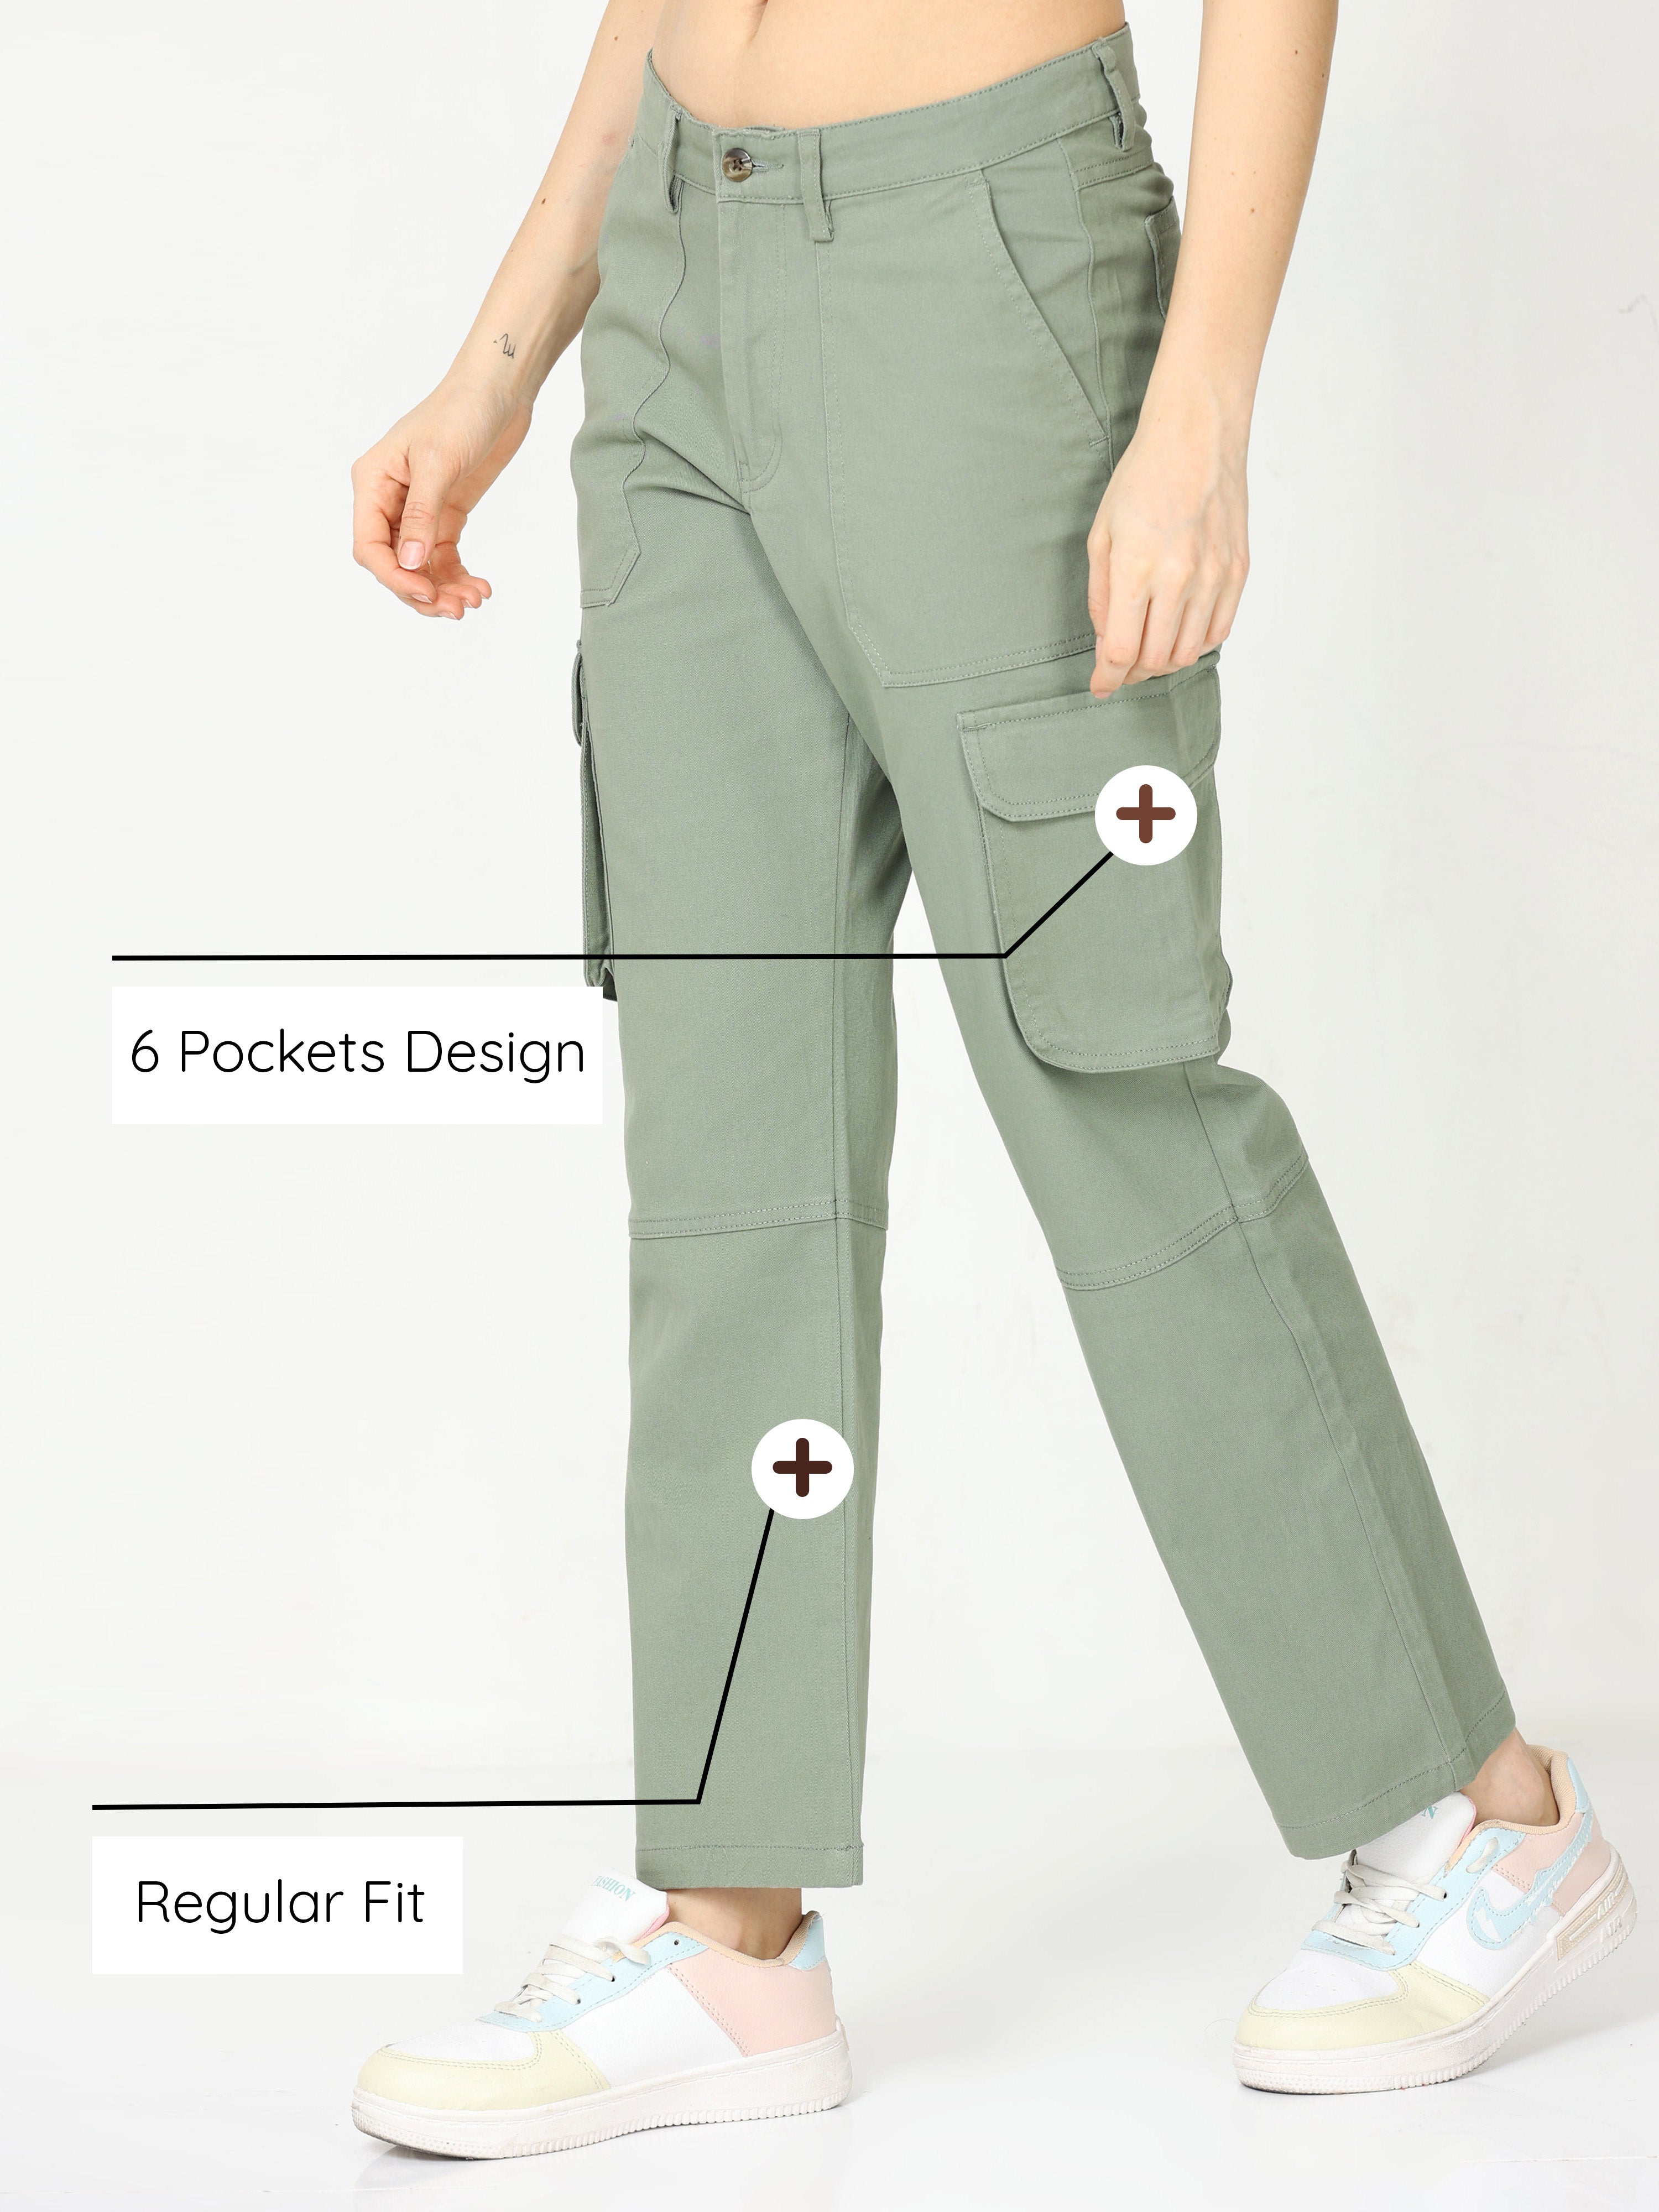 Work Outfit Idea: Olive Green Pants Do the Trick! | Glamour